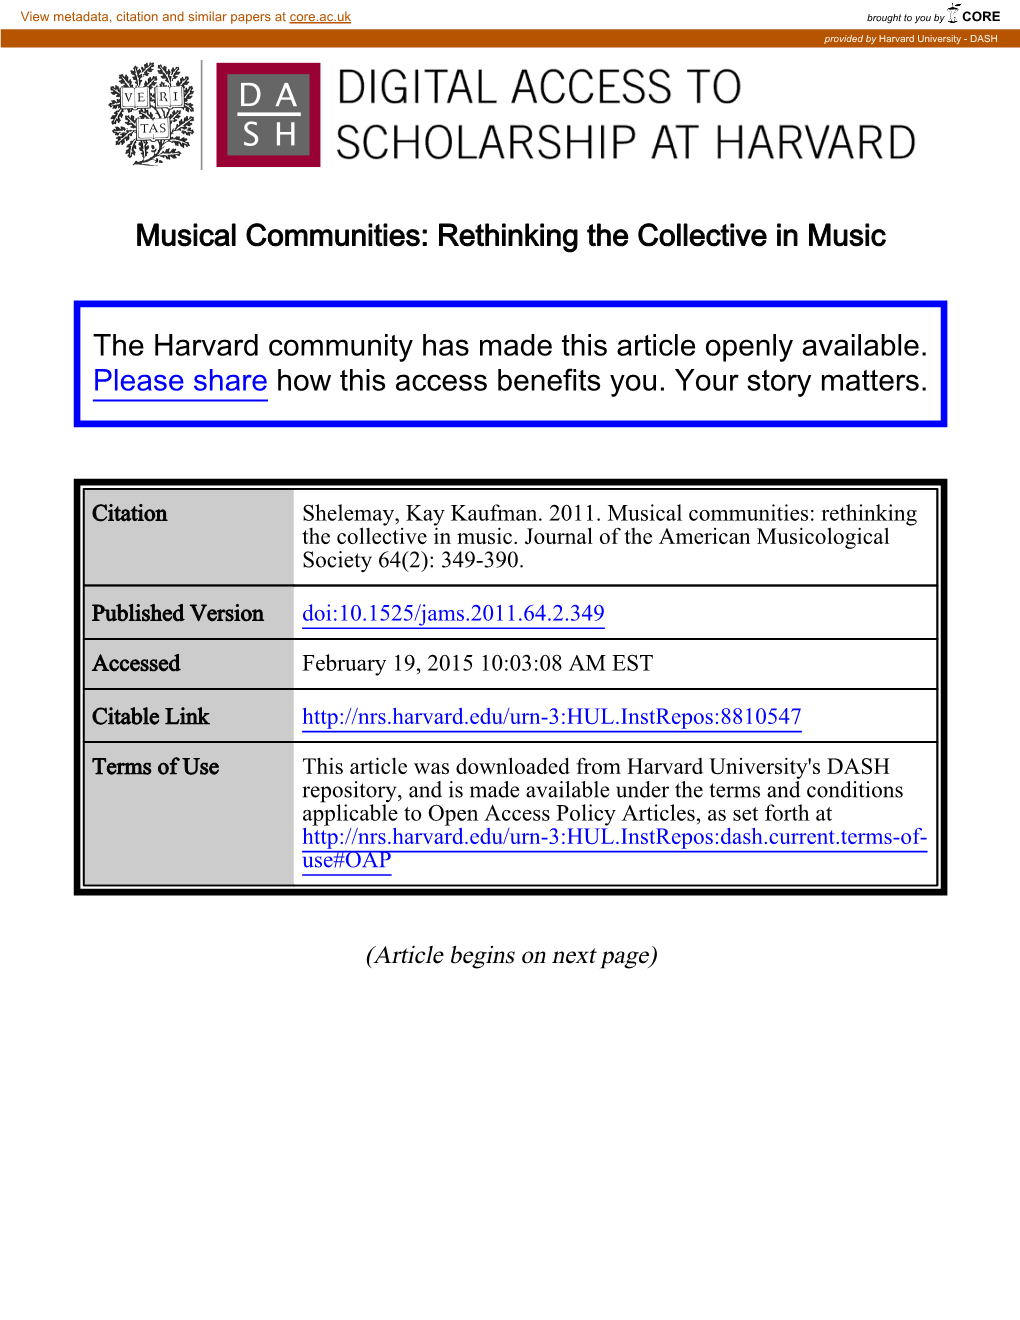 Rethinking the Collective in Music the Harvard Community Has Made This